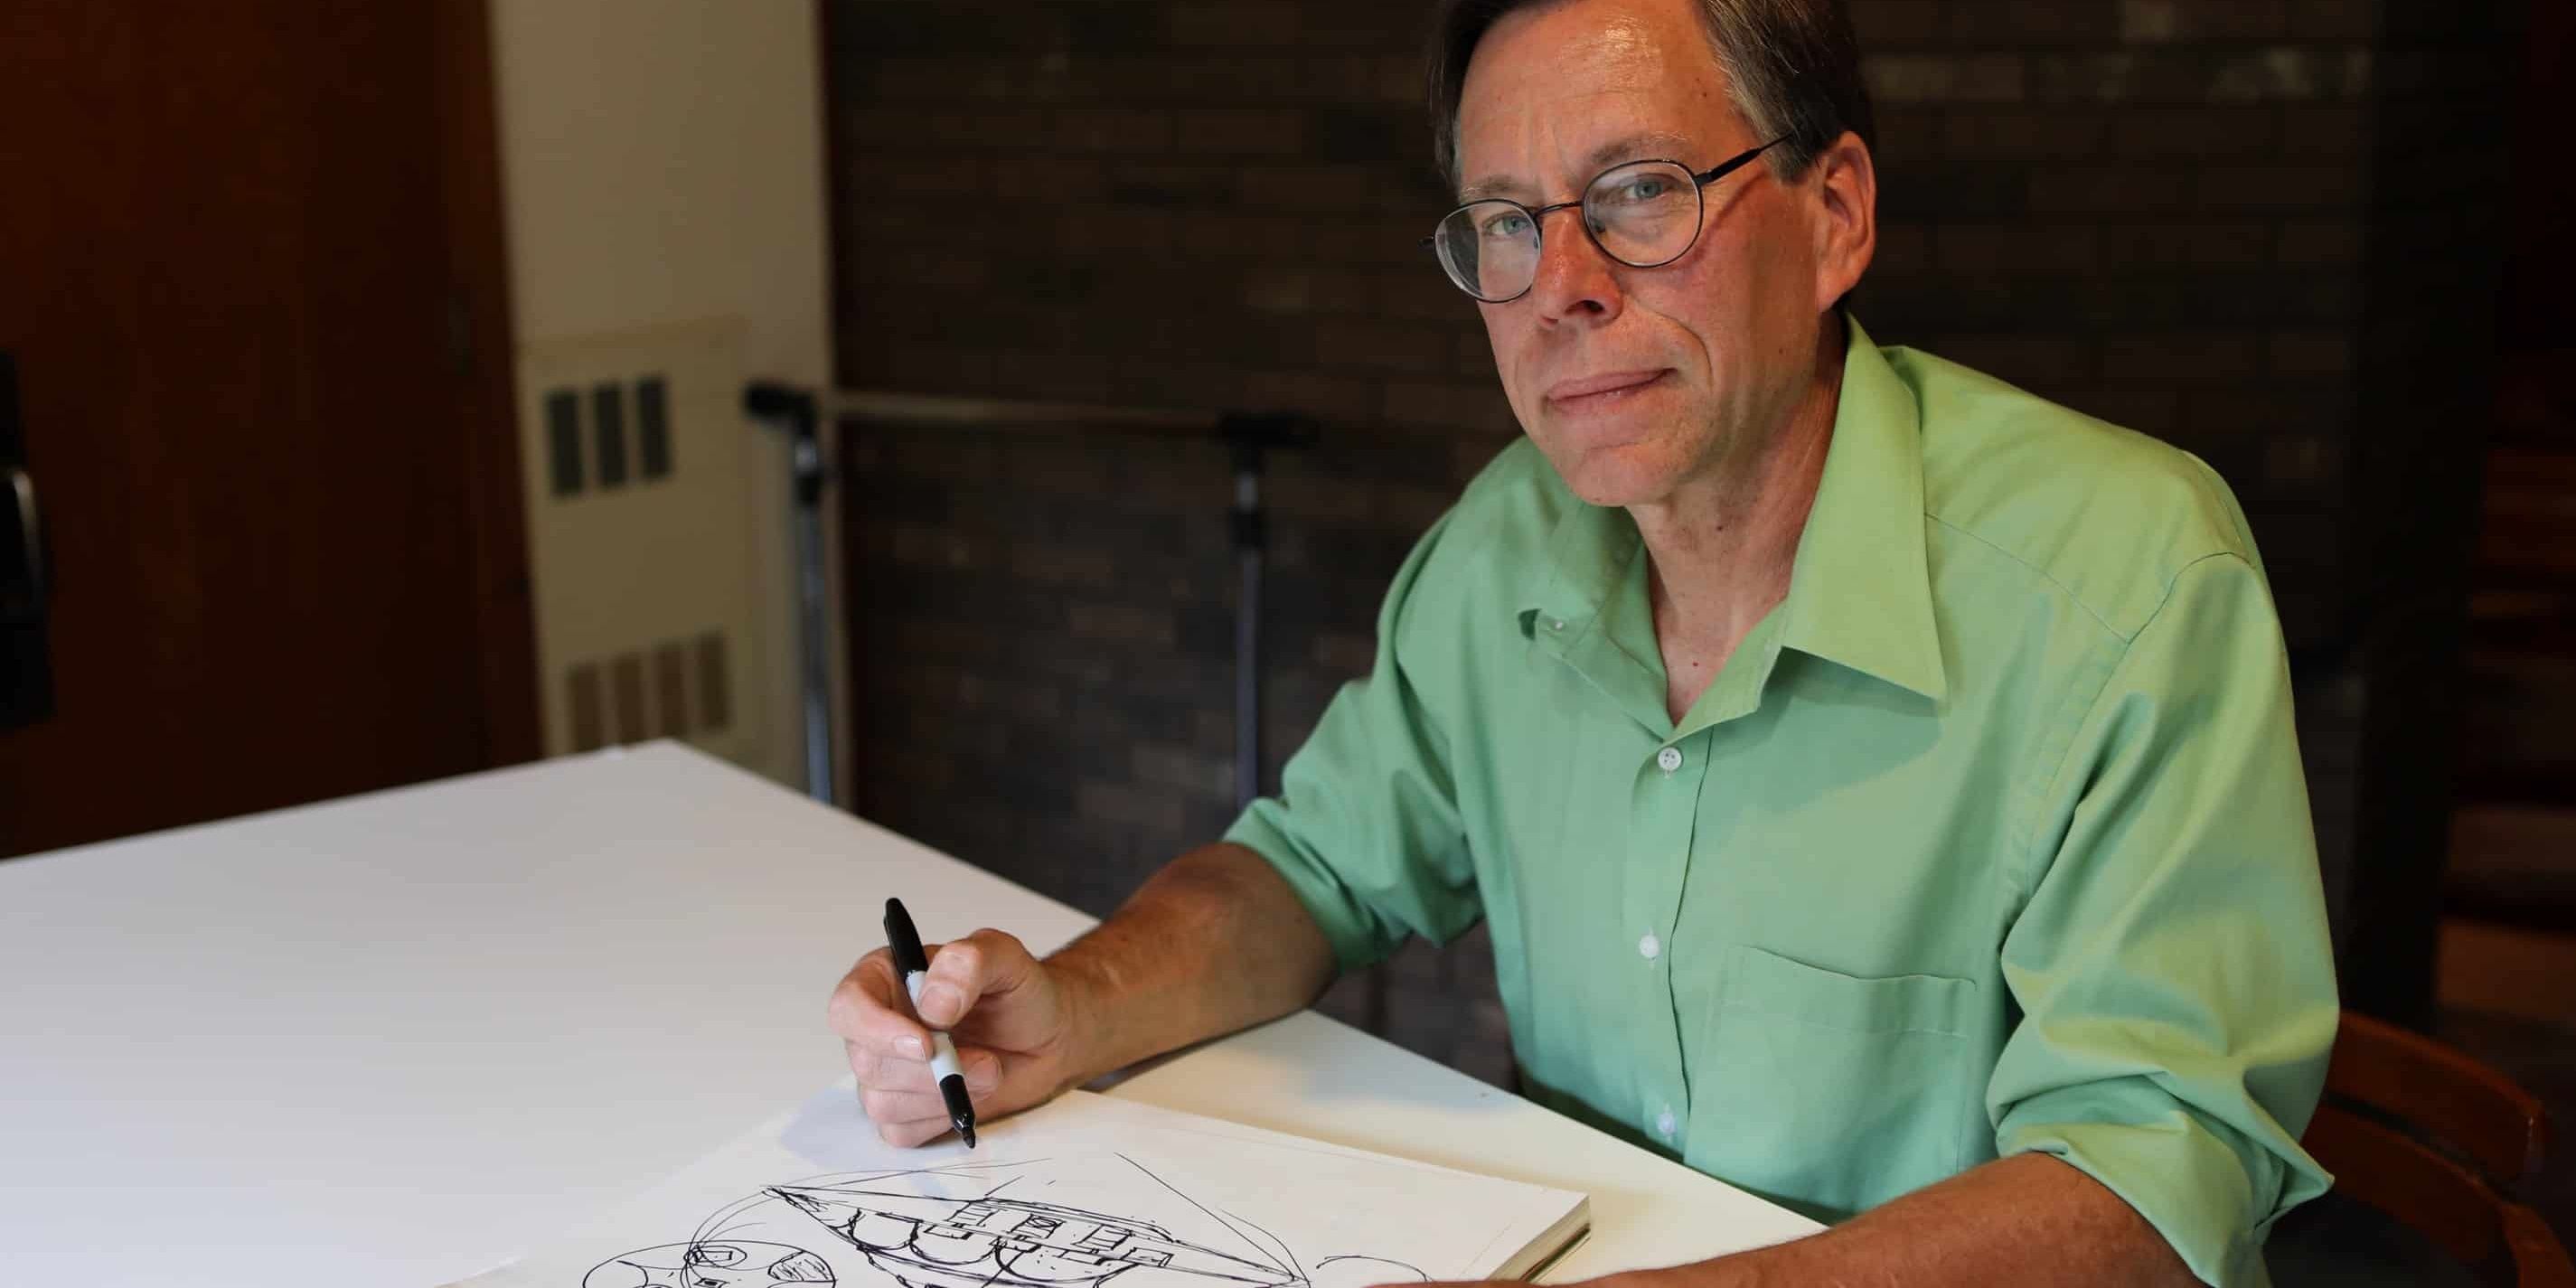 Bob Lazar sits in front of a table with a marker in his hand